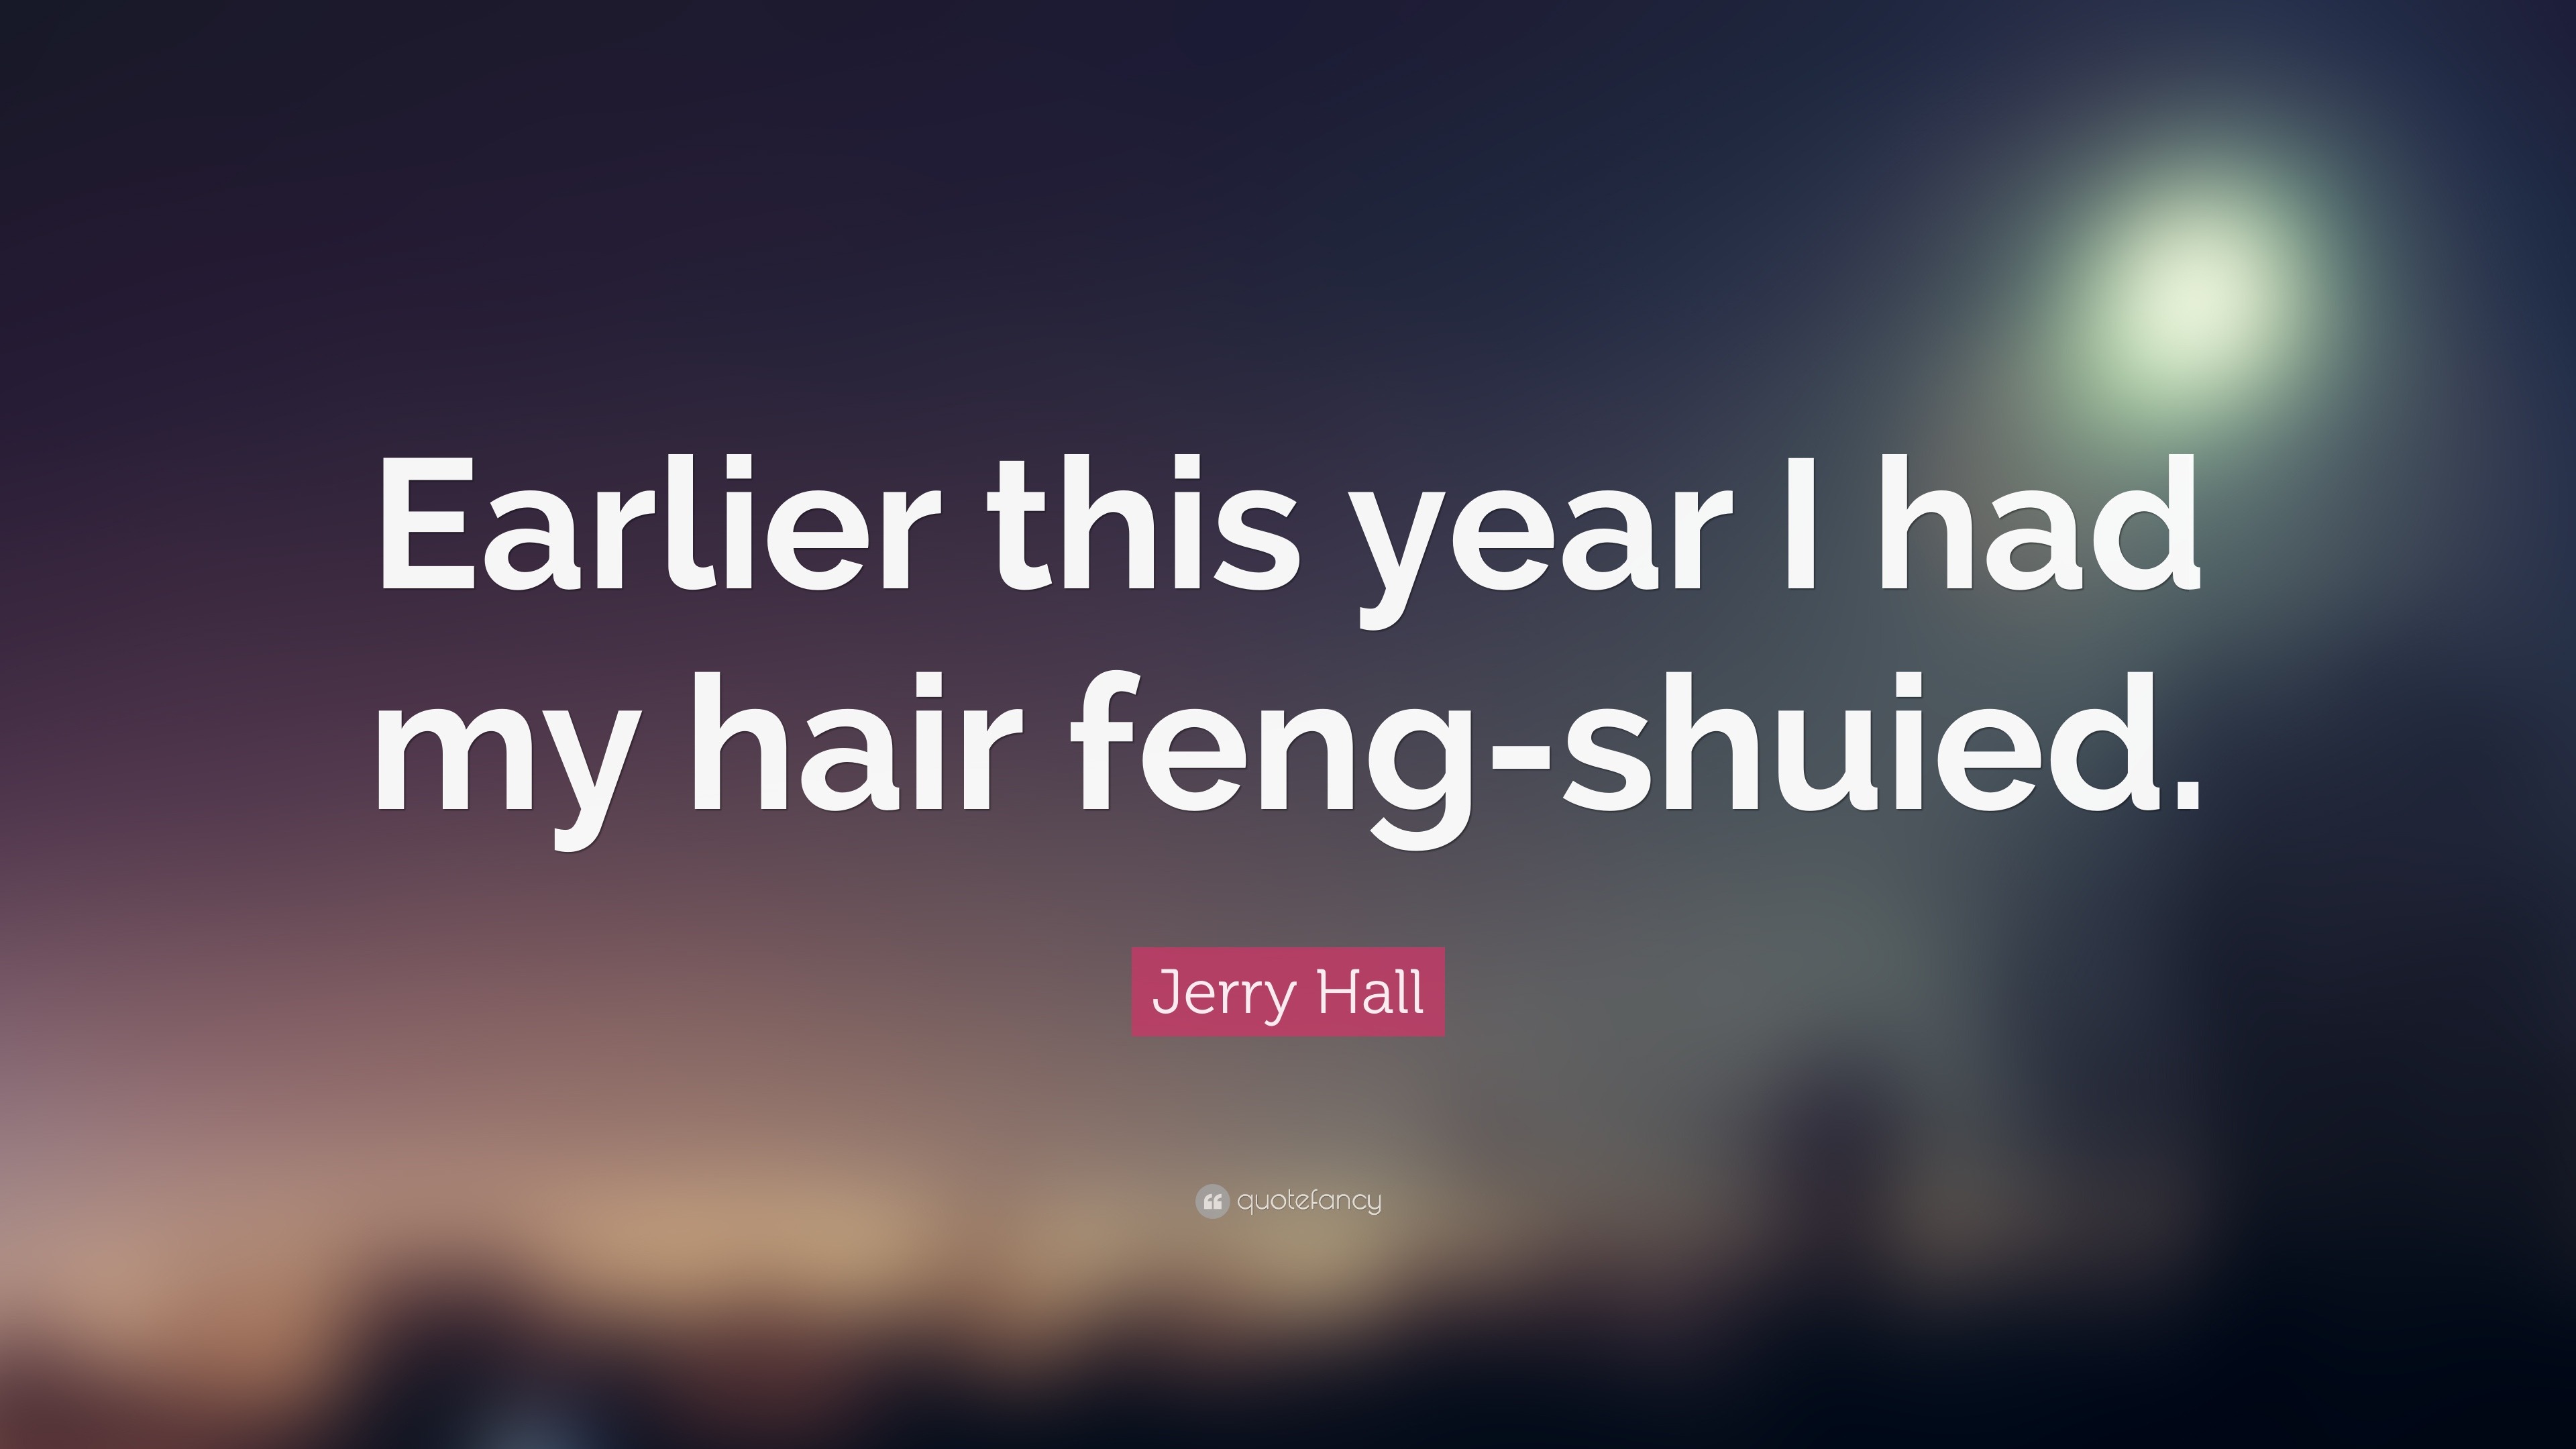 Jerry Hall Quotes 33 Wallpapers Quotefancy